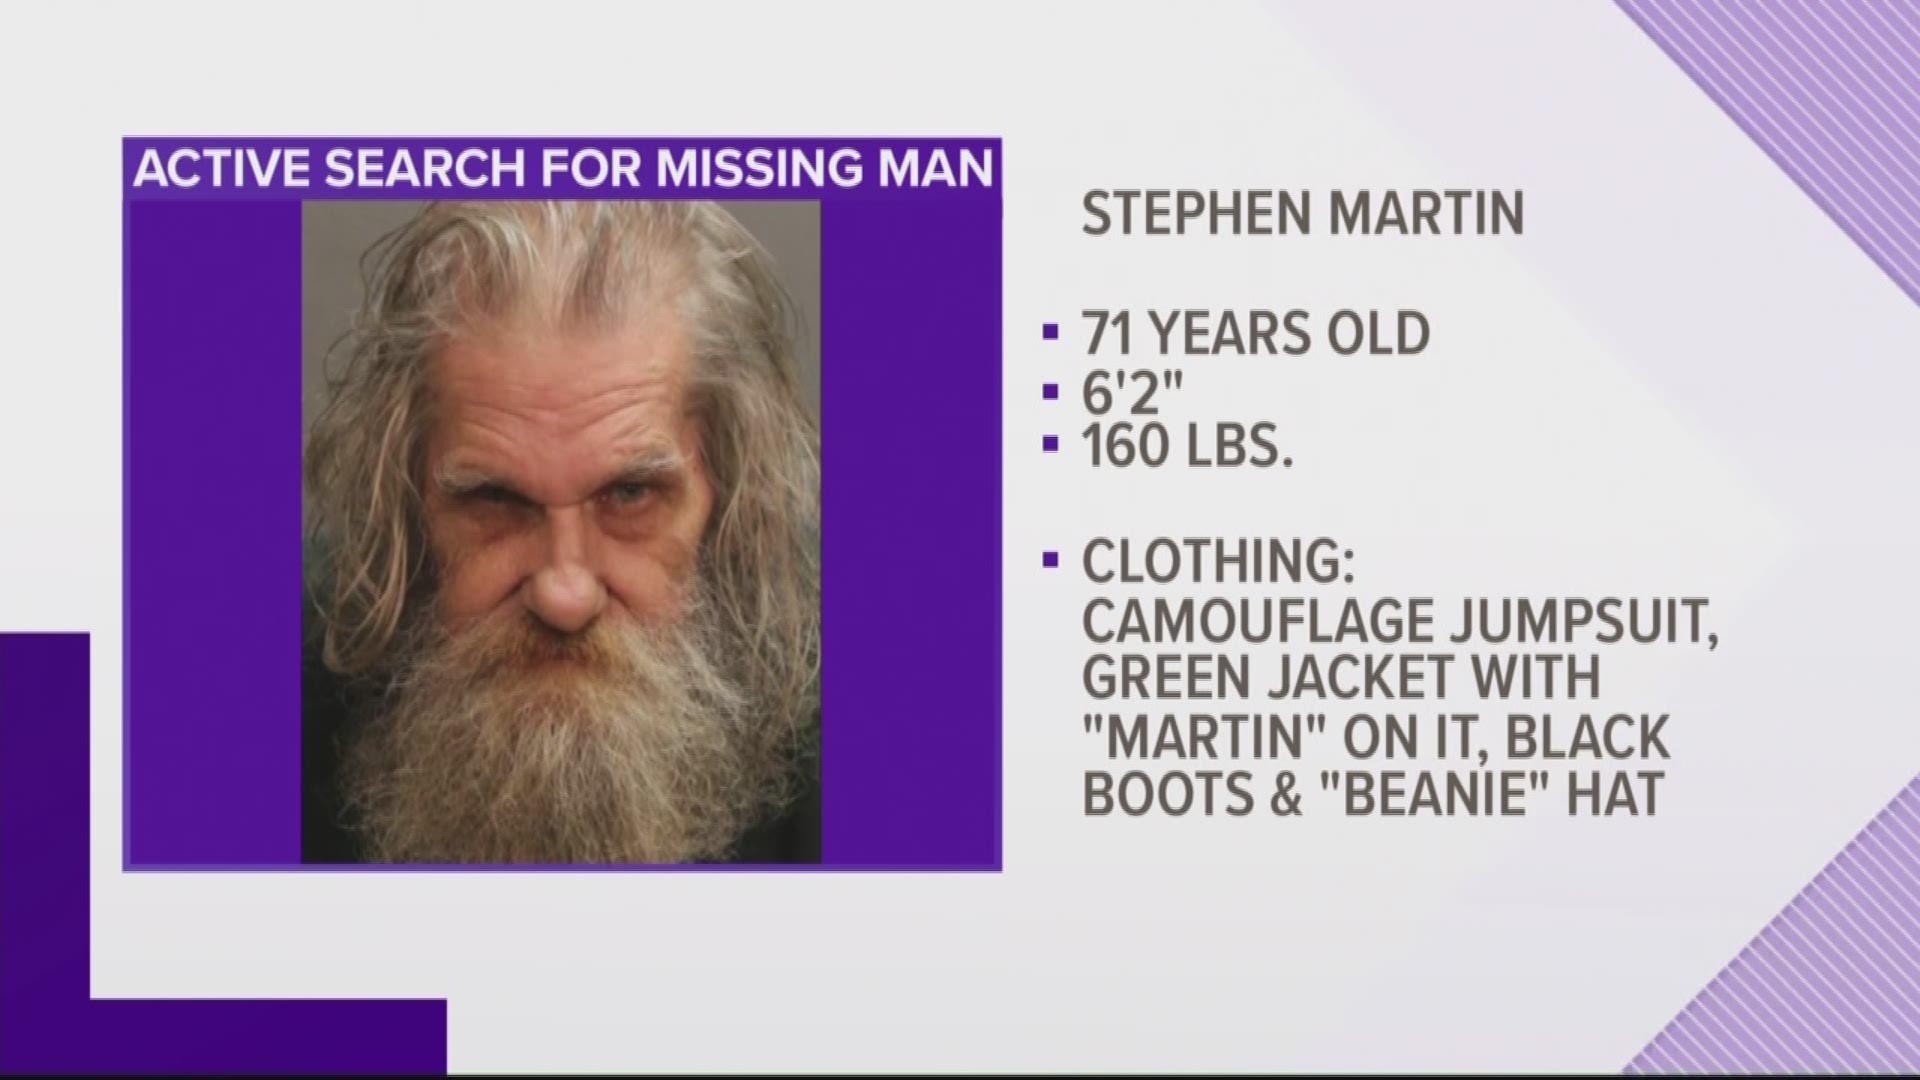 JSO said Stephan Fletcher Martin was reported missing from the 5100 block of Marlene Avenue after he was last seen around 11 p.m. on Wednesday.